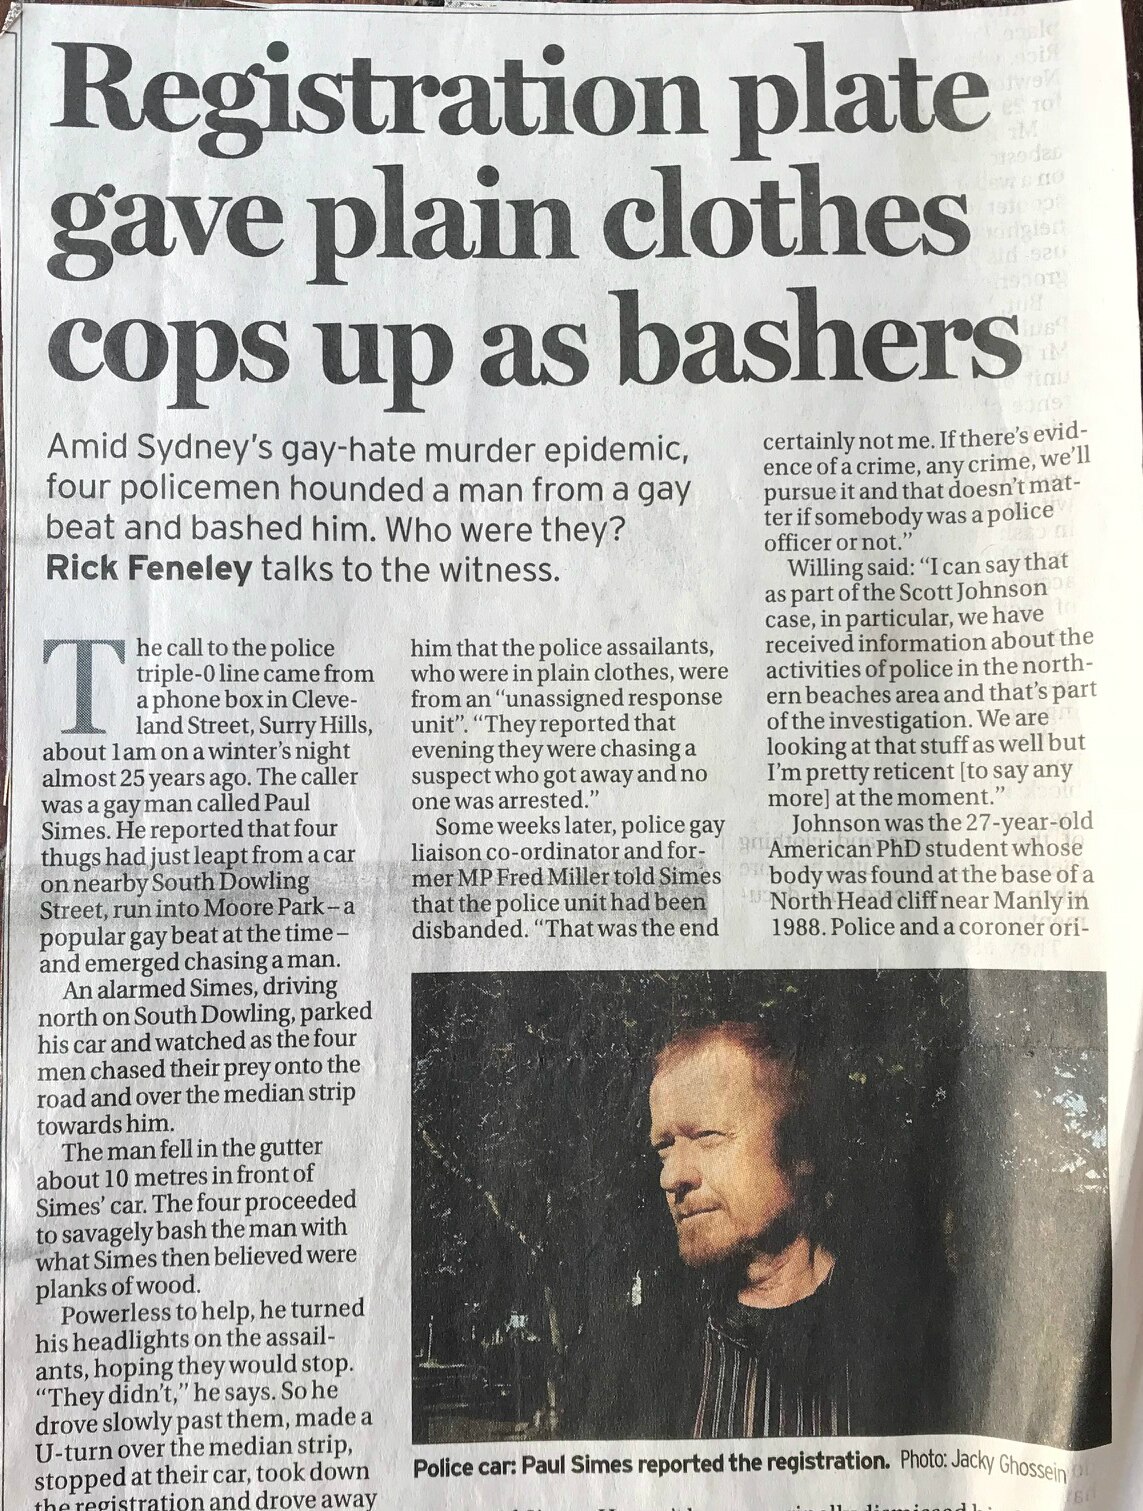 A newspaper clipping from the Sydney Morning Herald, reading "Registration plate gave plain clothes cops up as bashers"